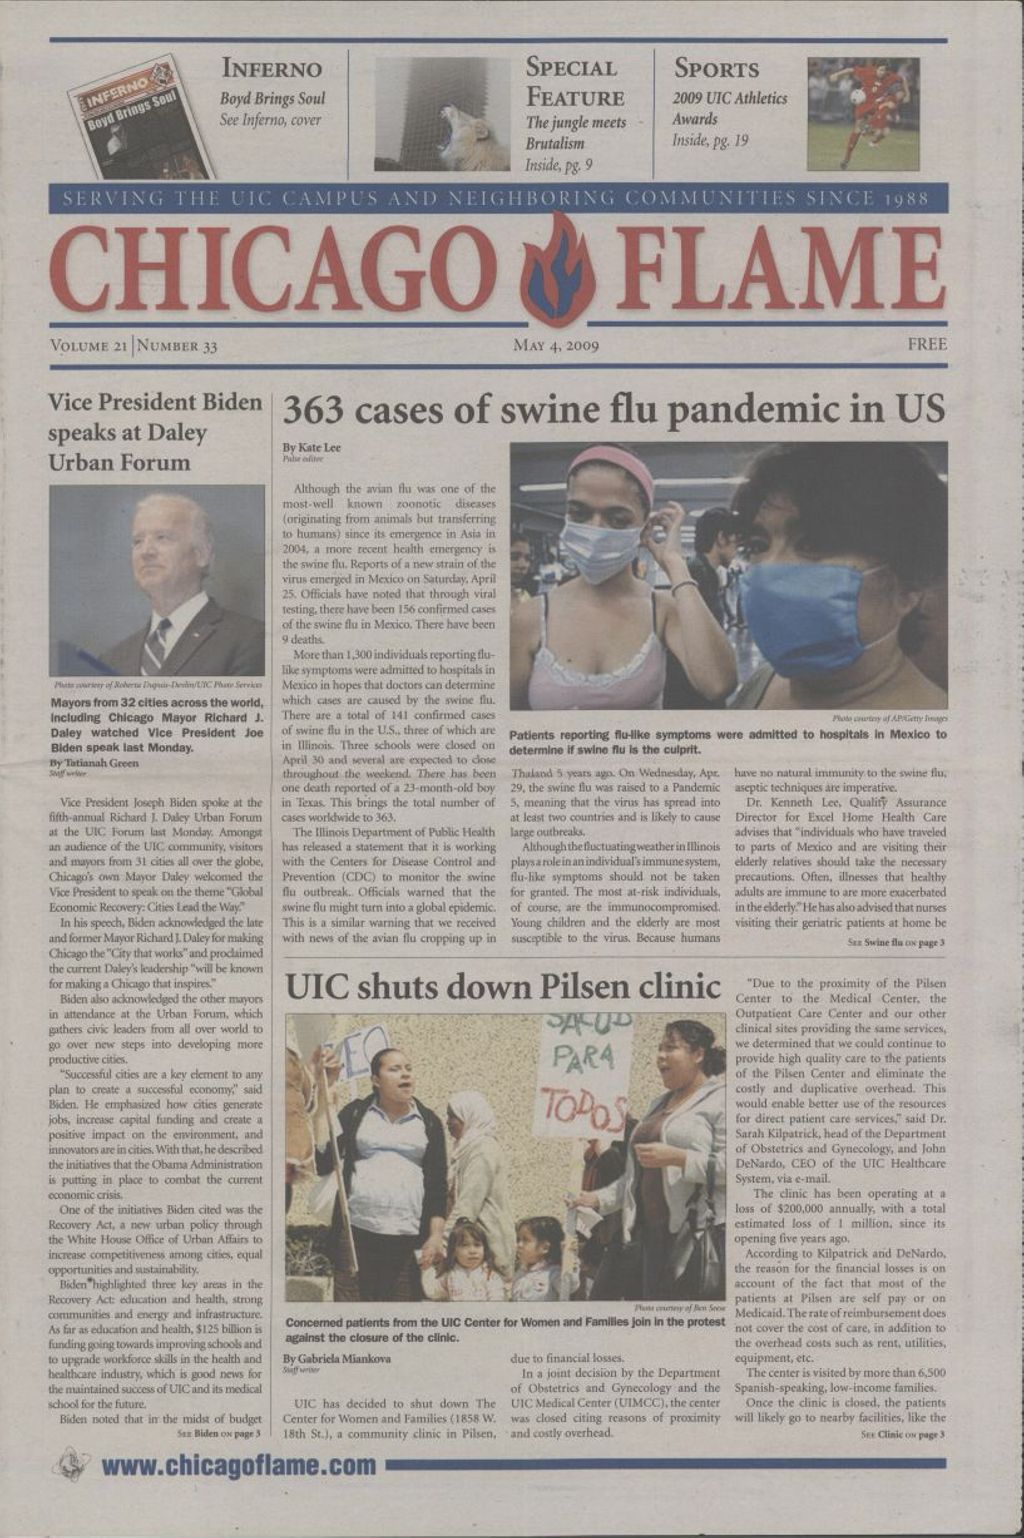 Chicago Flame (May 4, 2009)